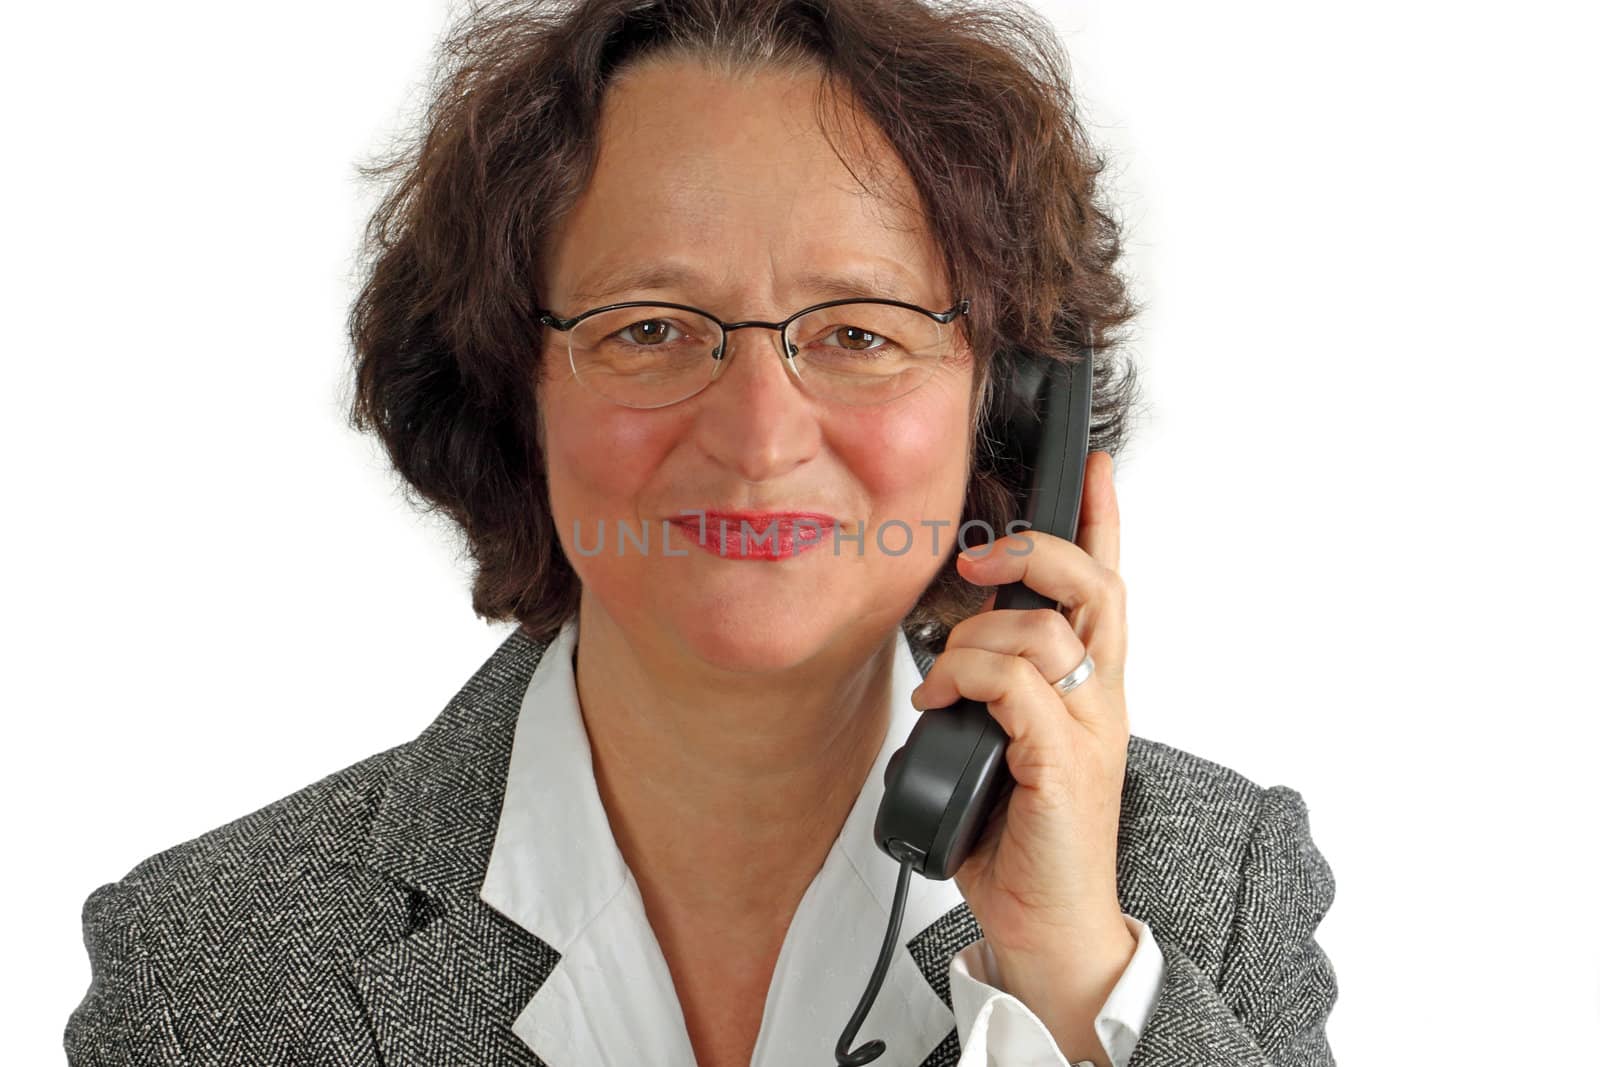 Business Woman Making A Phone Call

